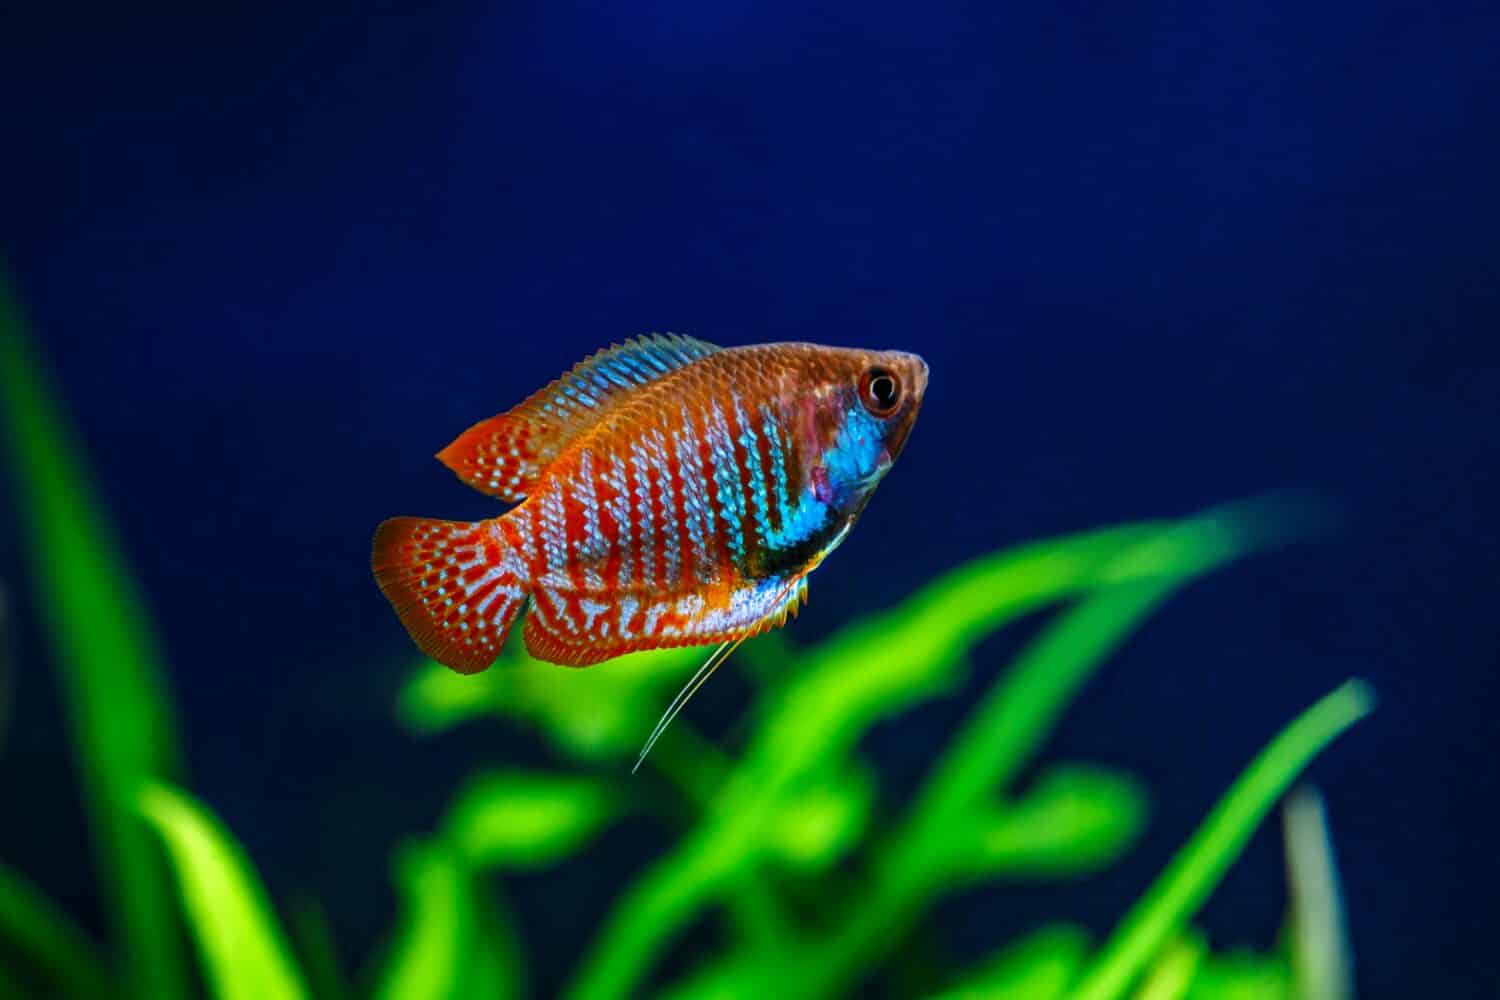 Dwarf gourami can be found in a variety of colors, but they all have thread-like ventral fins that look like whiskers. 